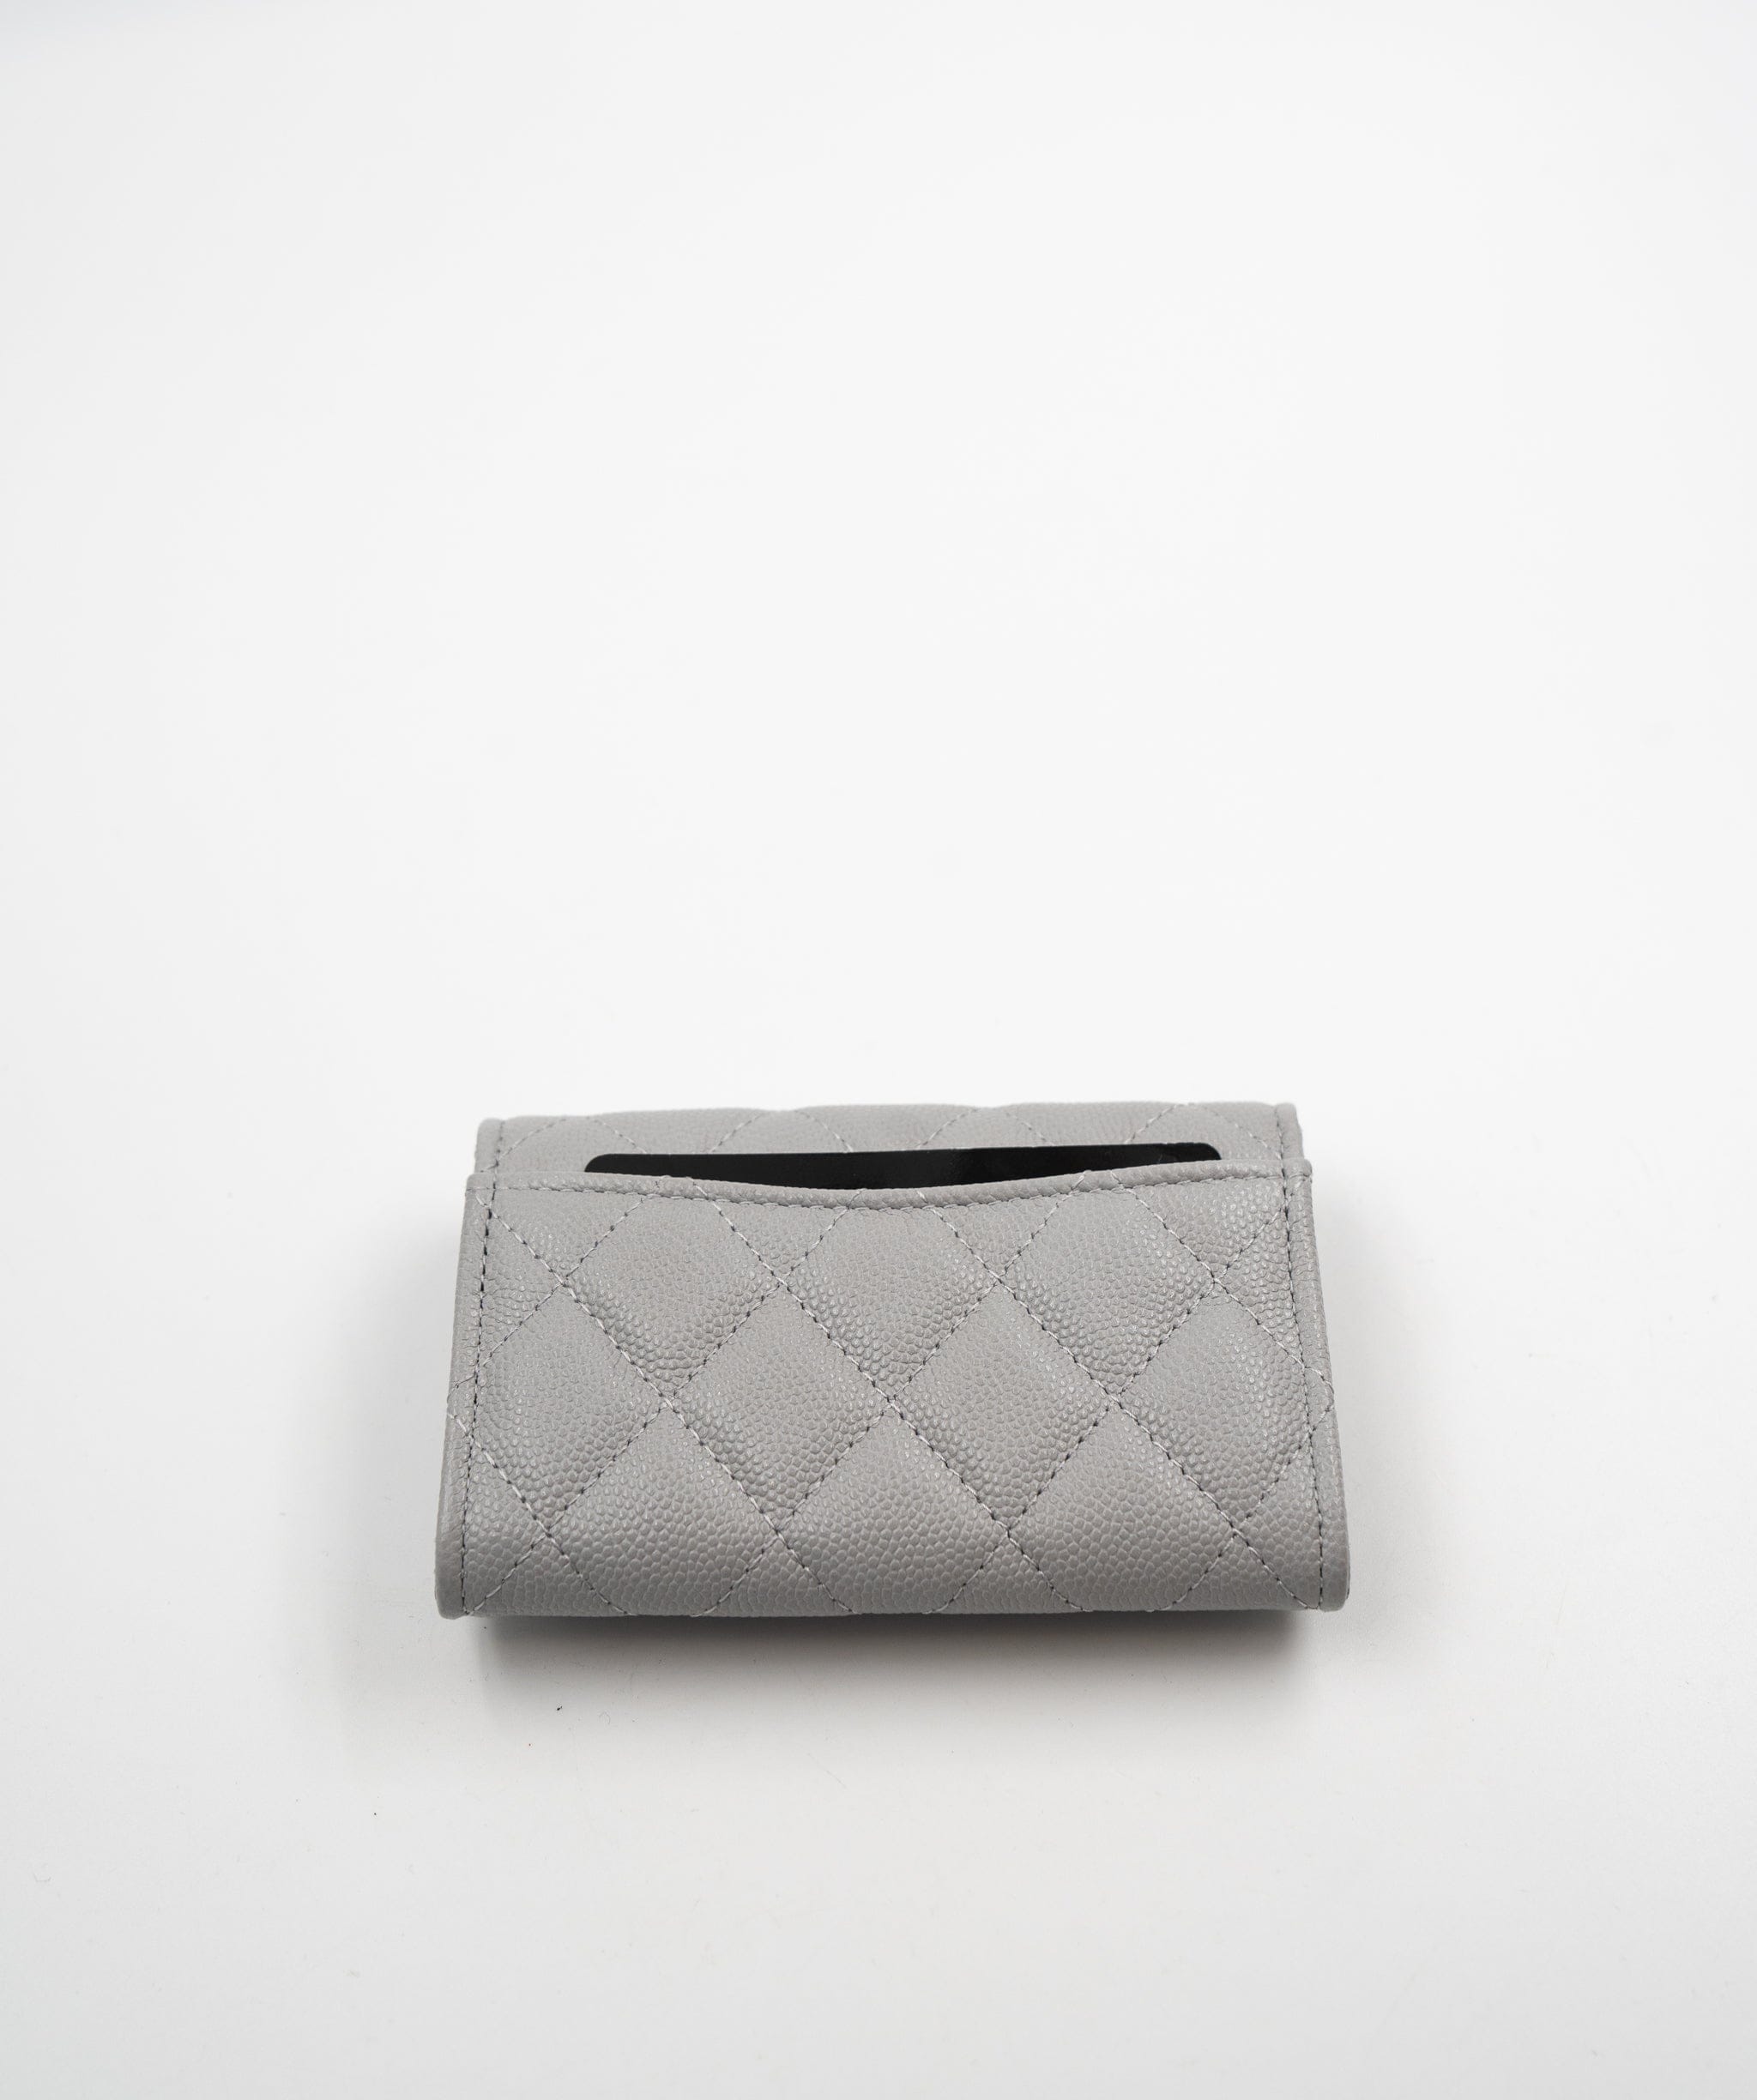 Chanel Chanel grey caviar card holder with a flap, full set - AEC1053